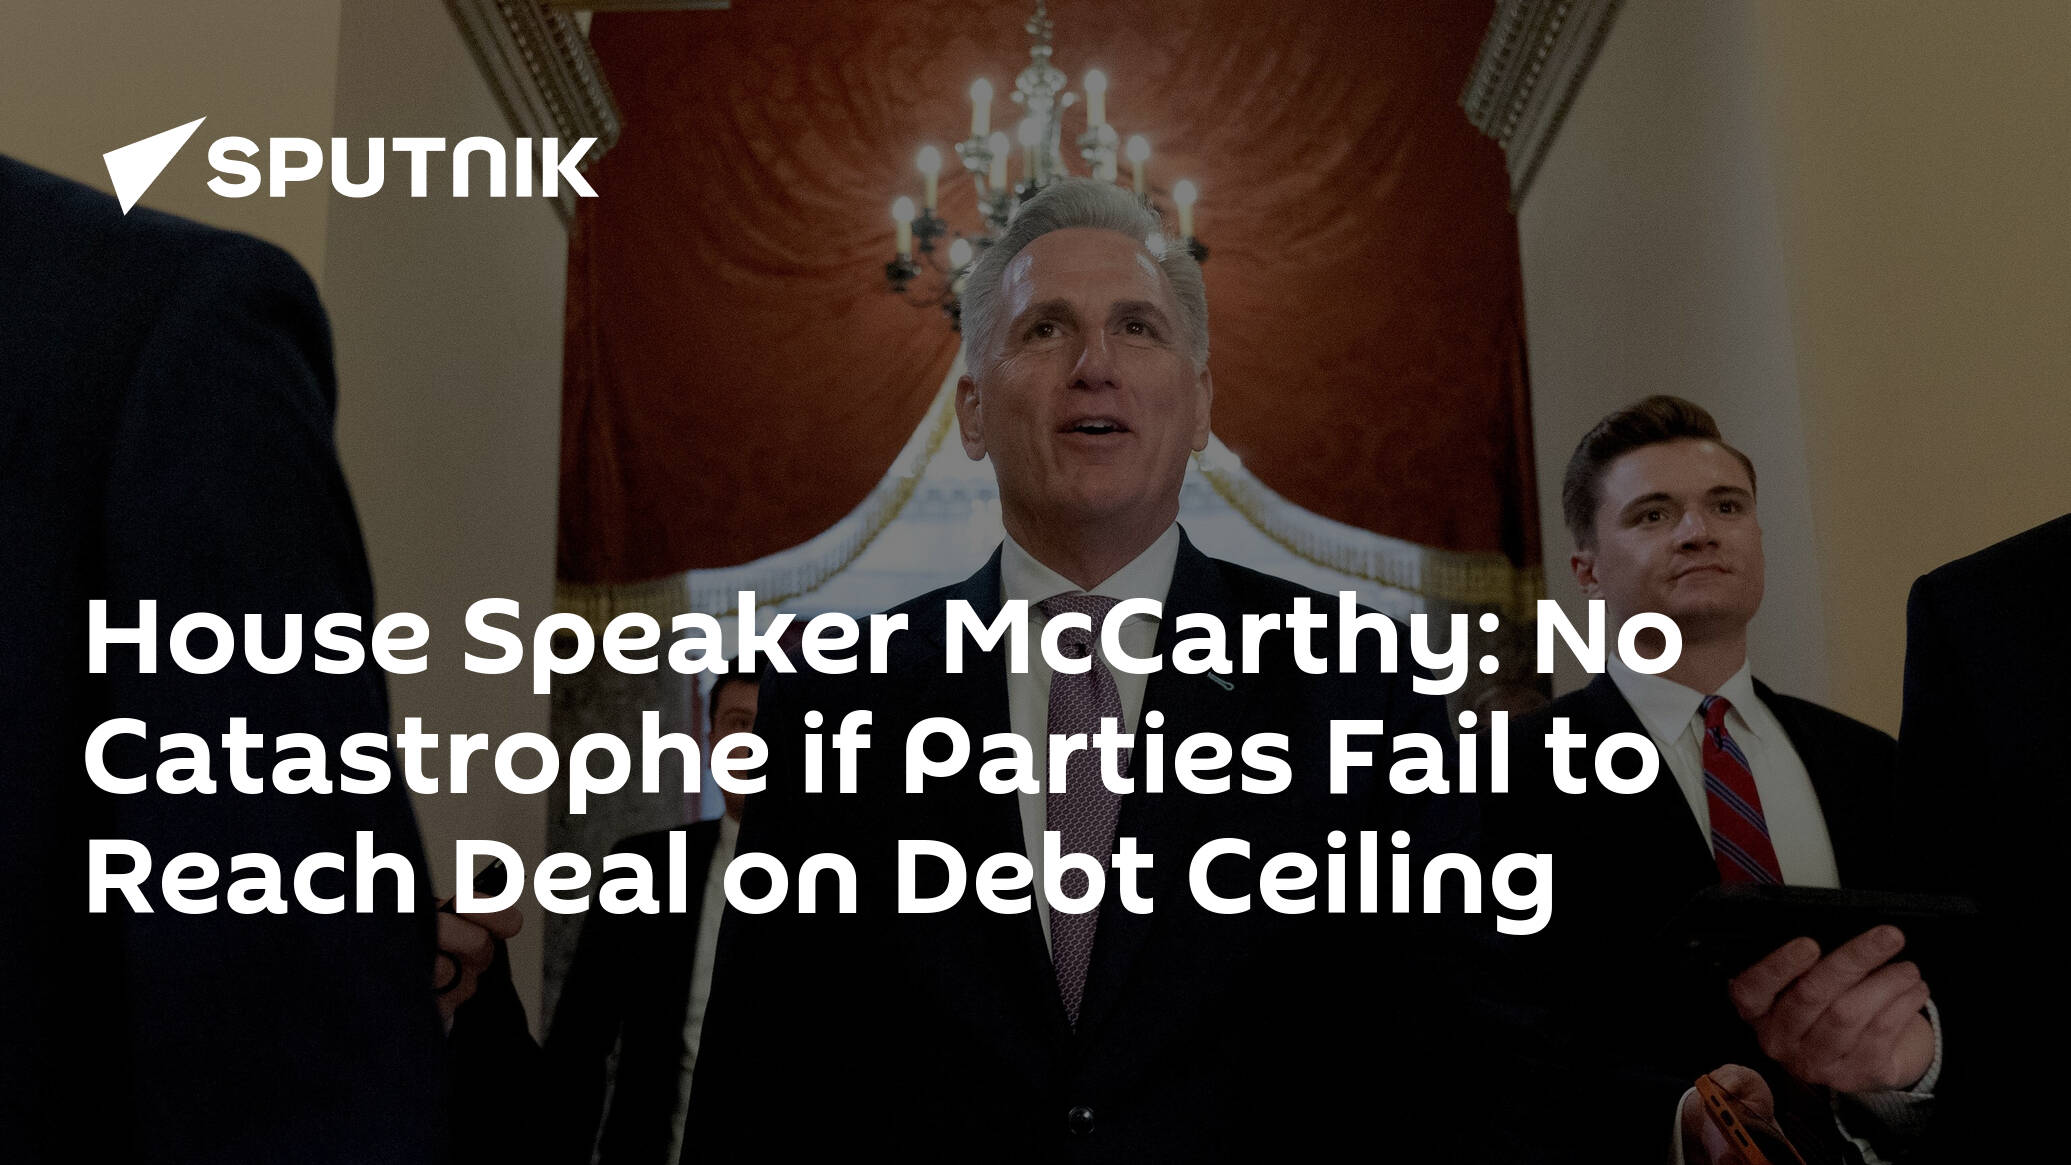 House Speaker McCarthy Says No Catastrophe if Parties Fail to Reach Deal on Debt Ceiling